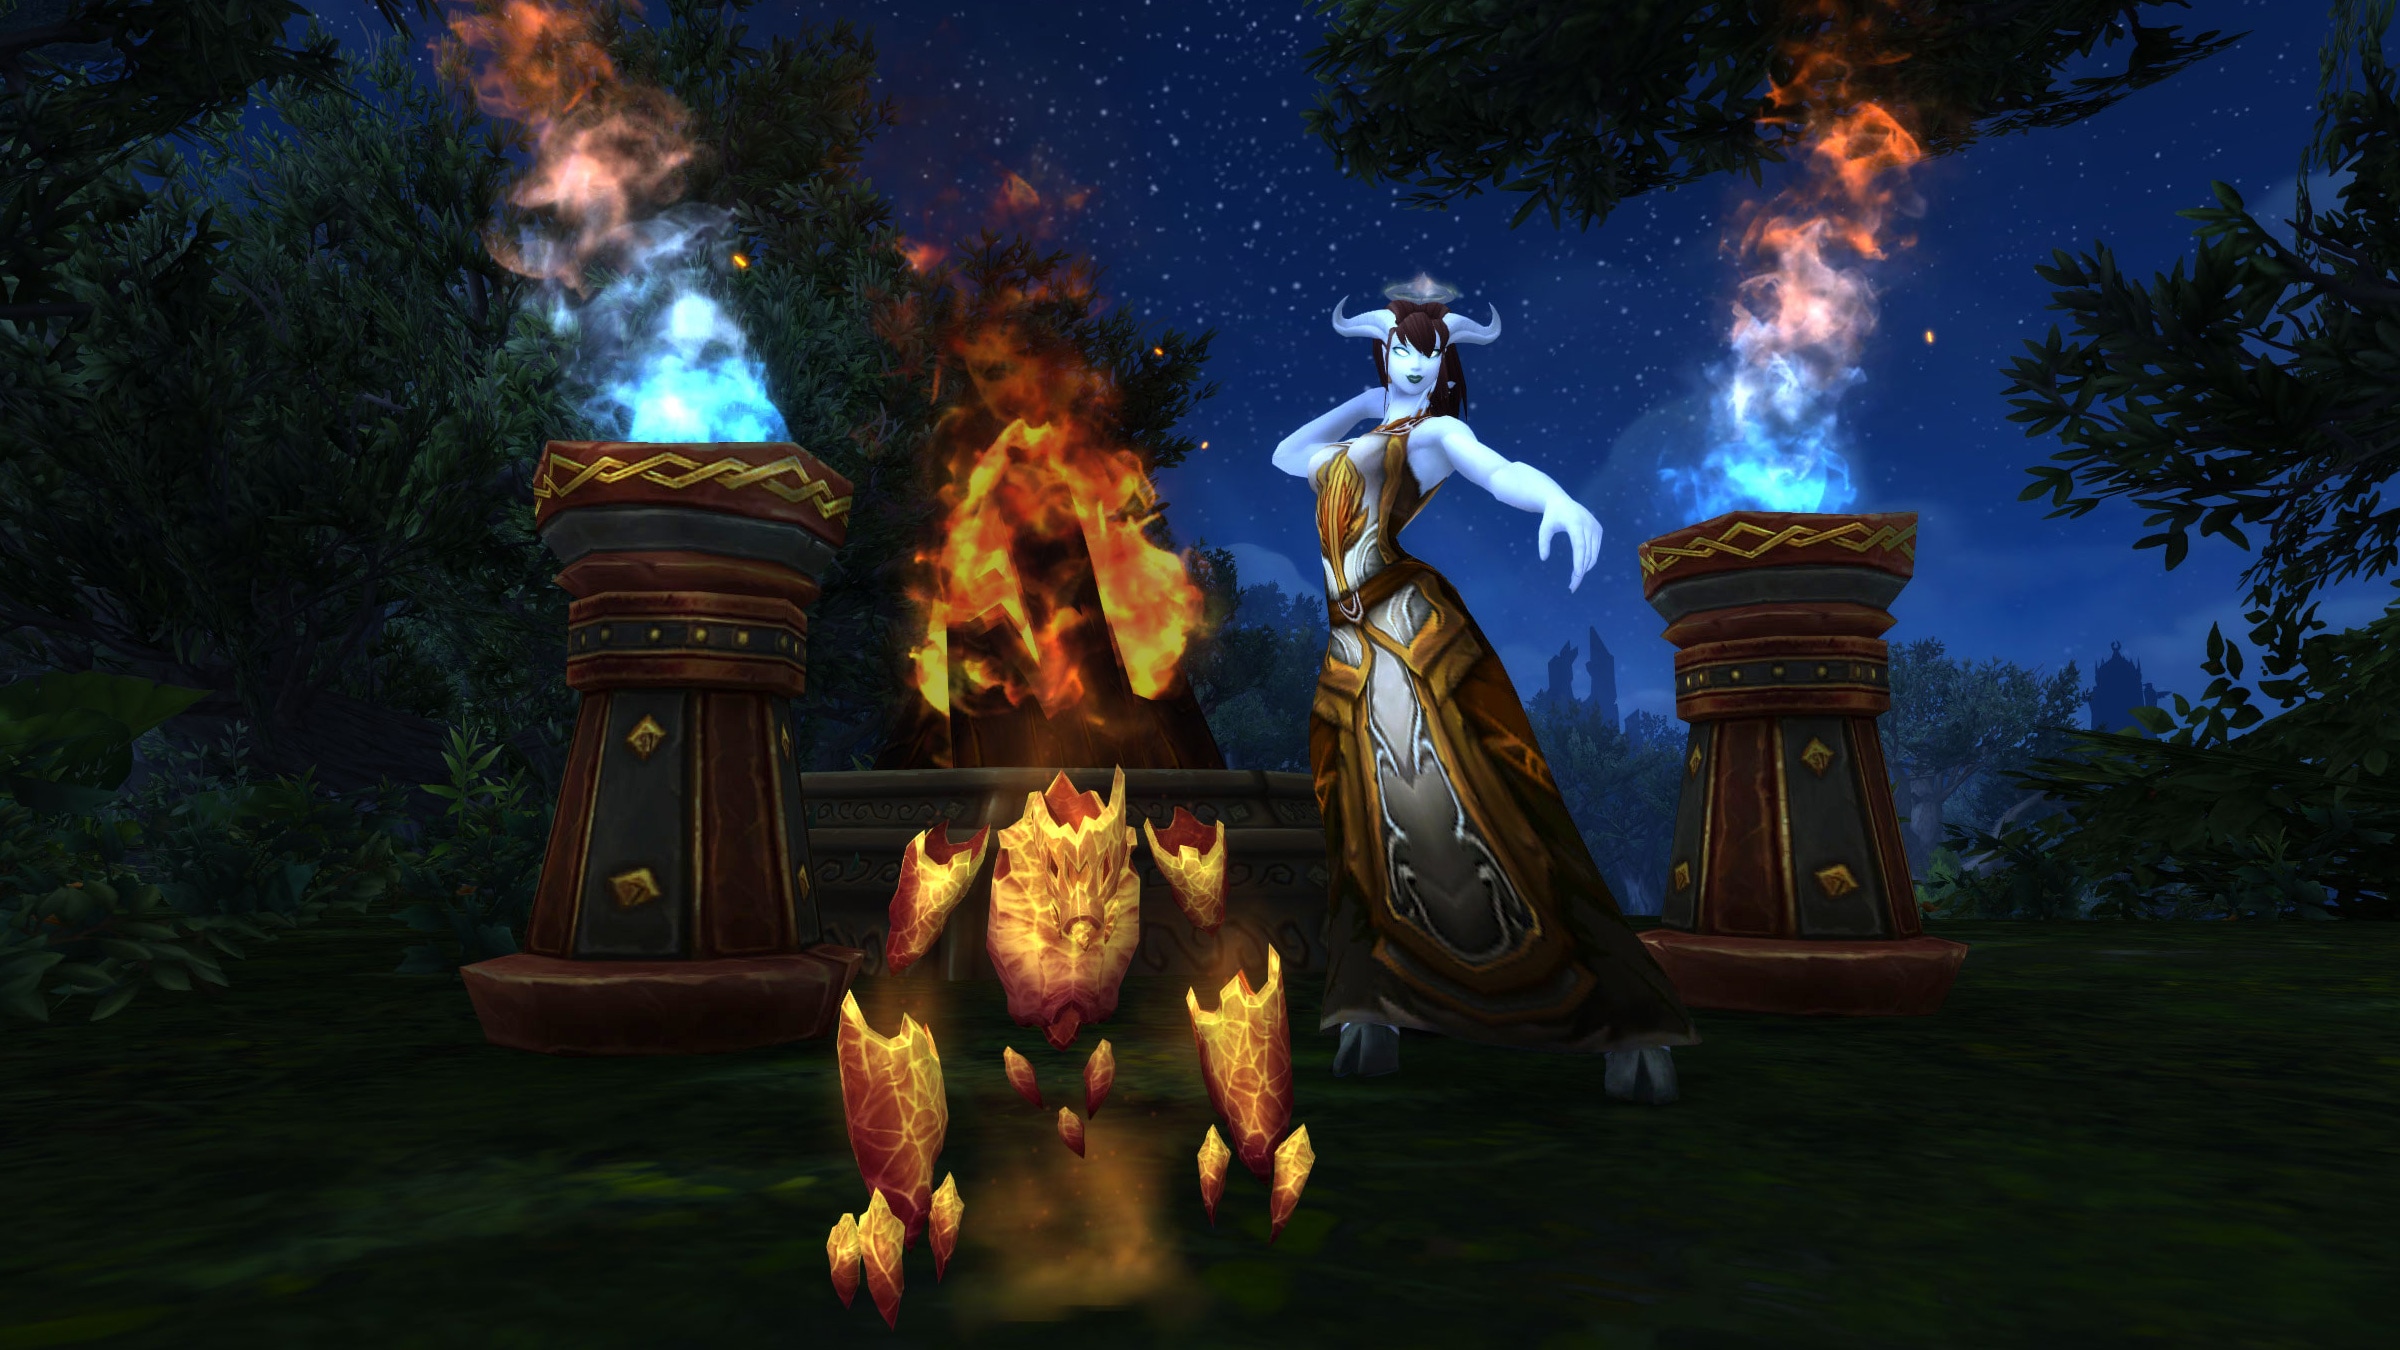 Play With Fire During the Midsummer Fire Festival – June 21–July 5